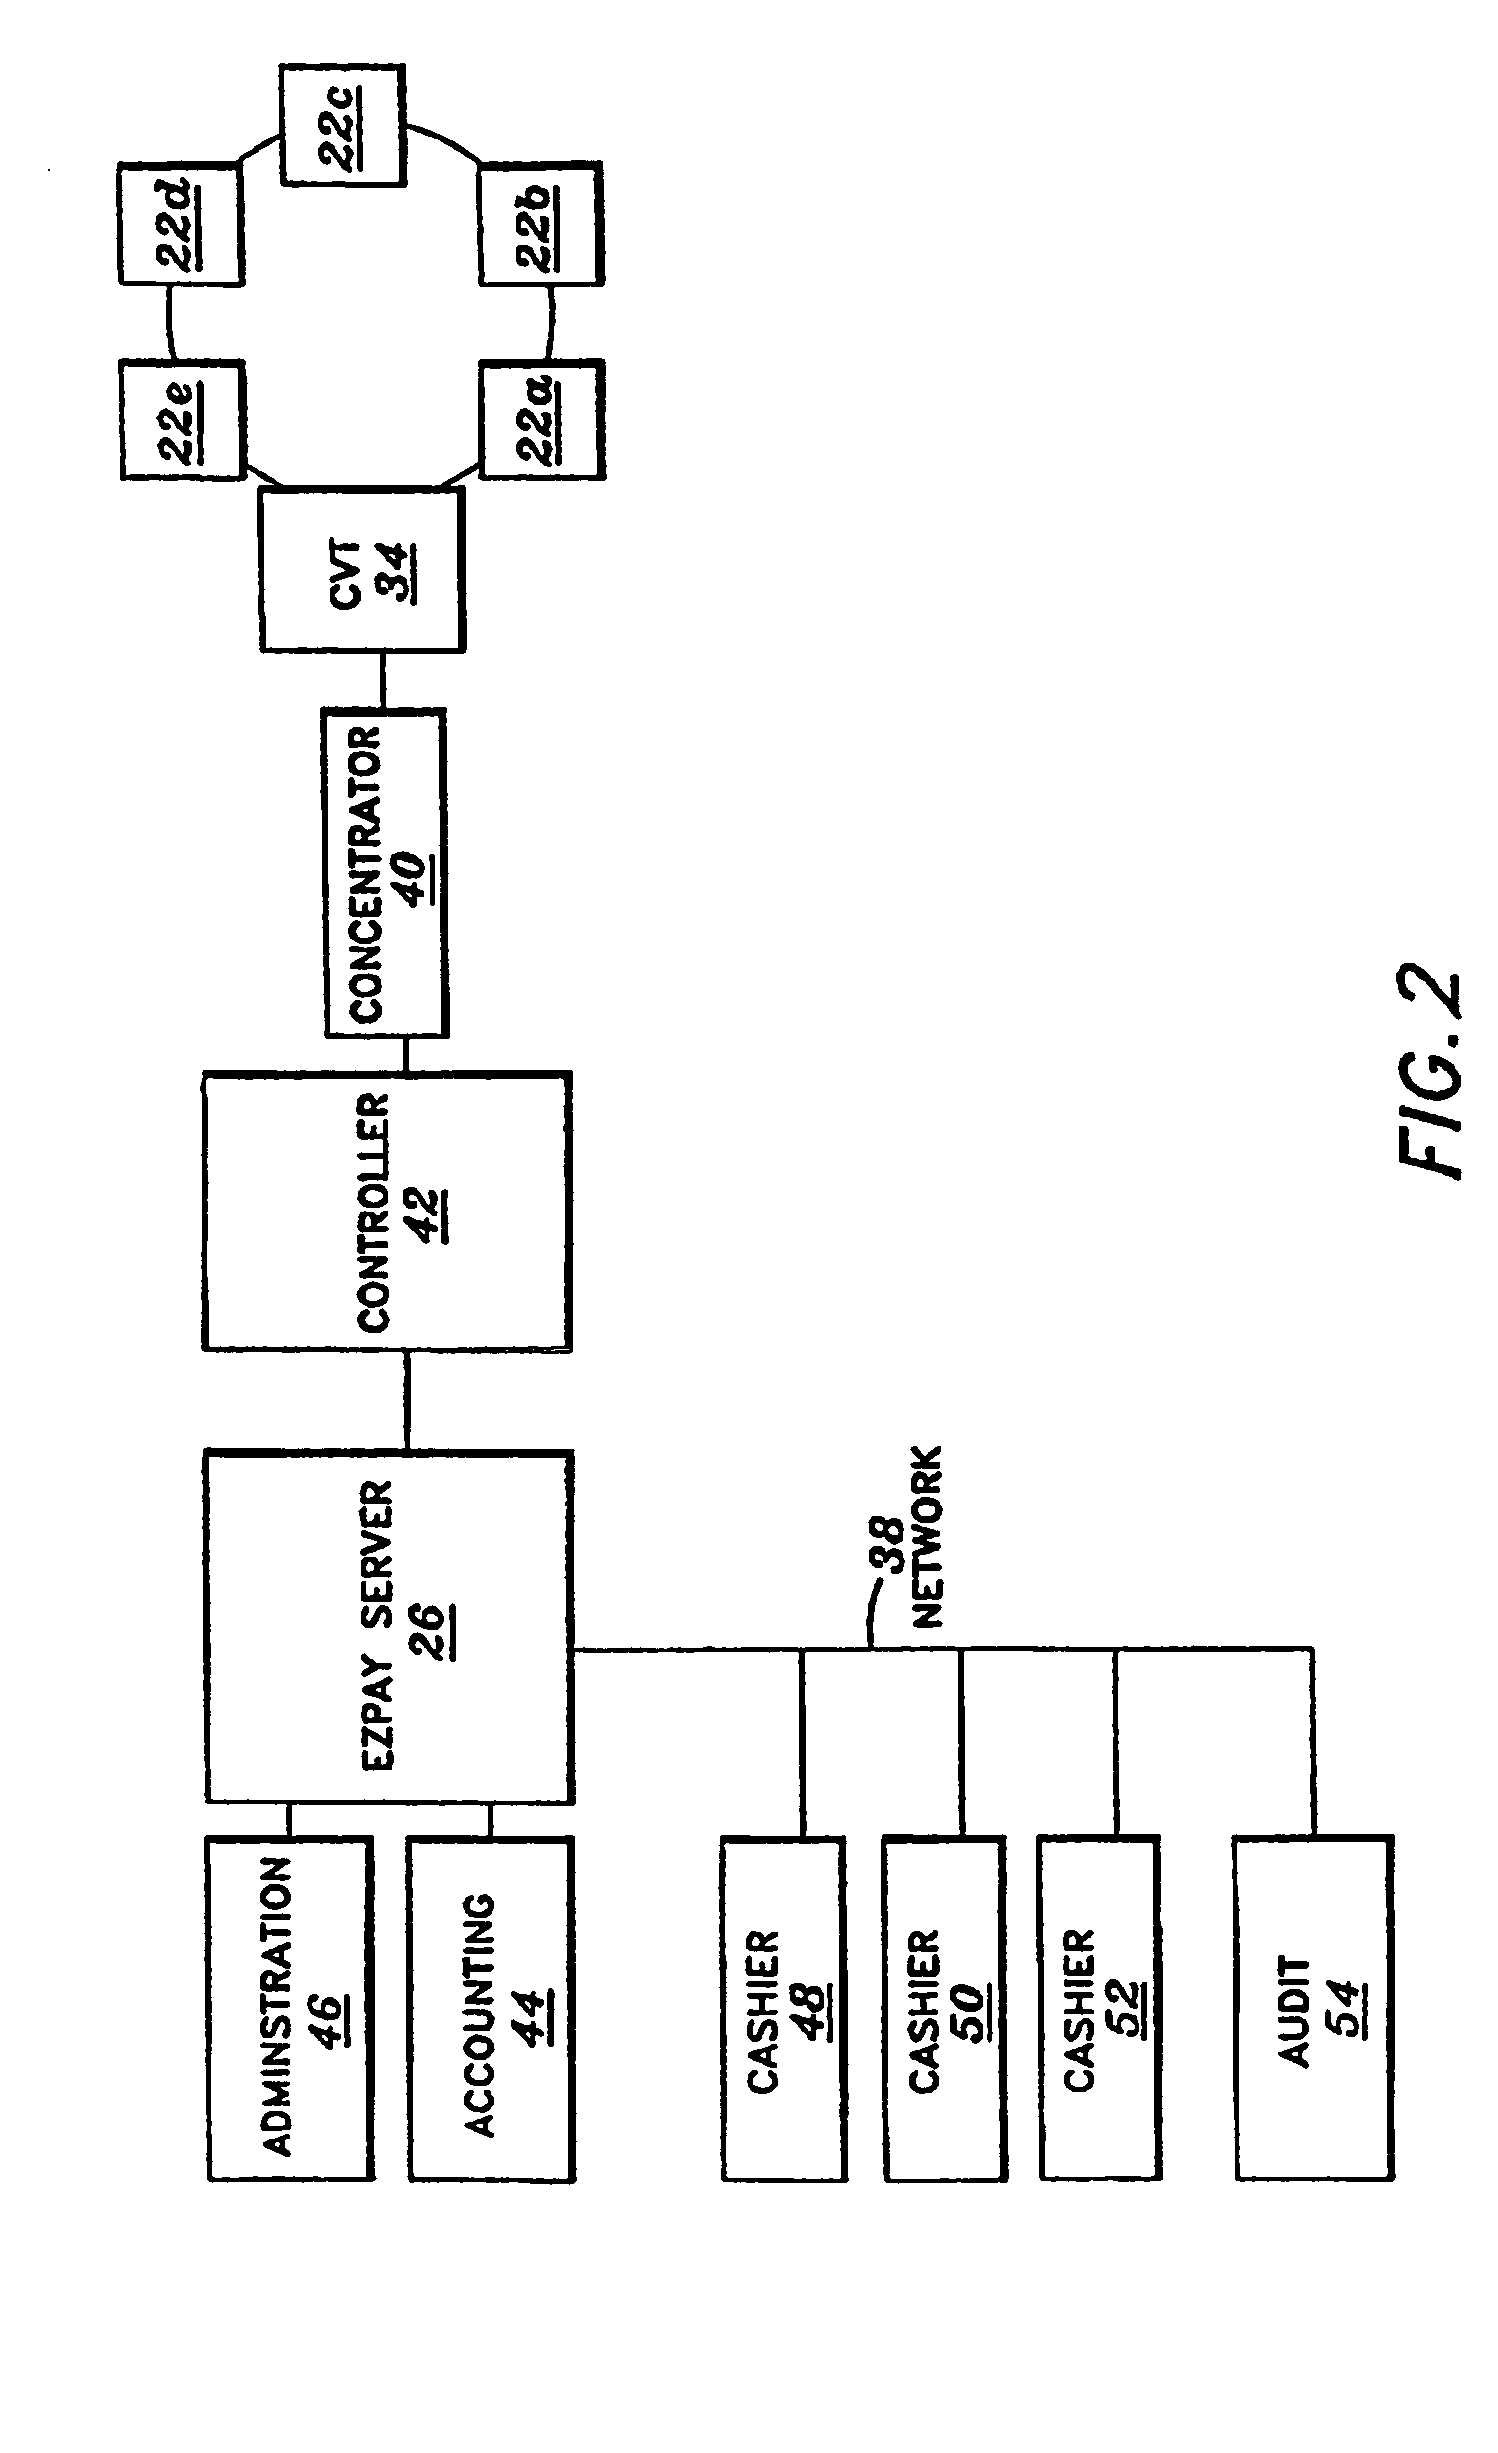 Gaming environment including portable transaction devices